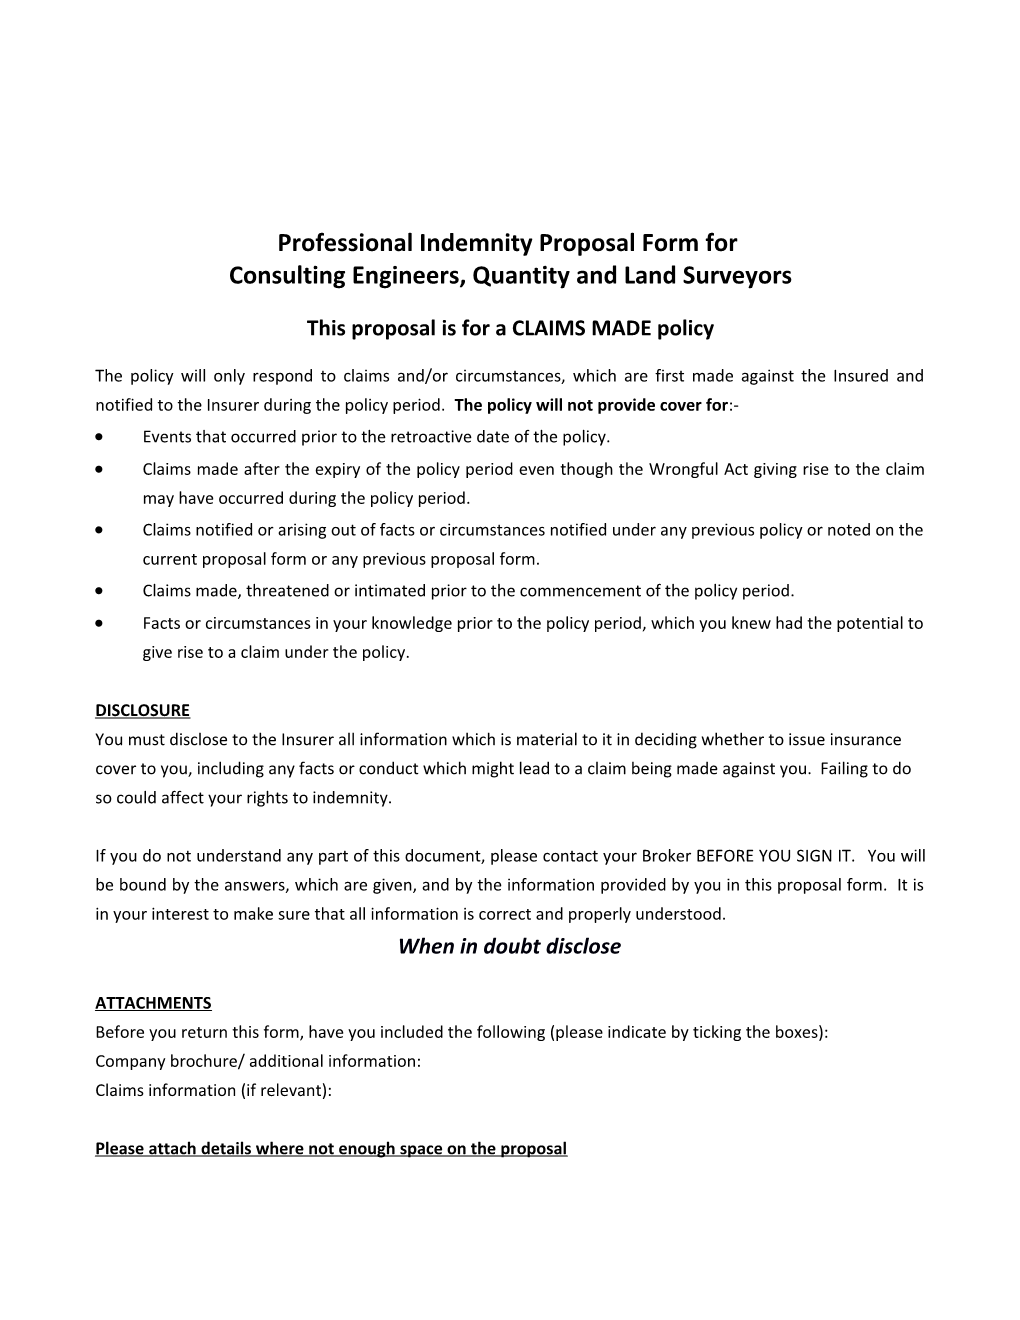 Professional Indemnity Proposal Form For